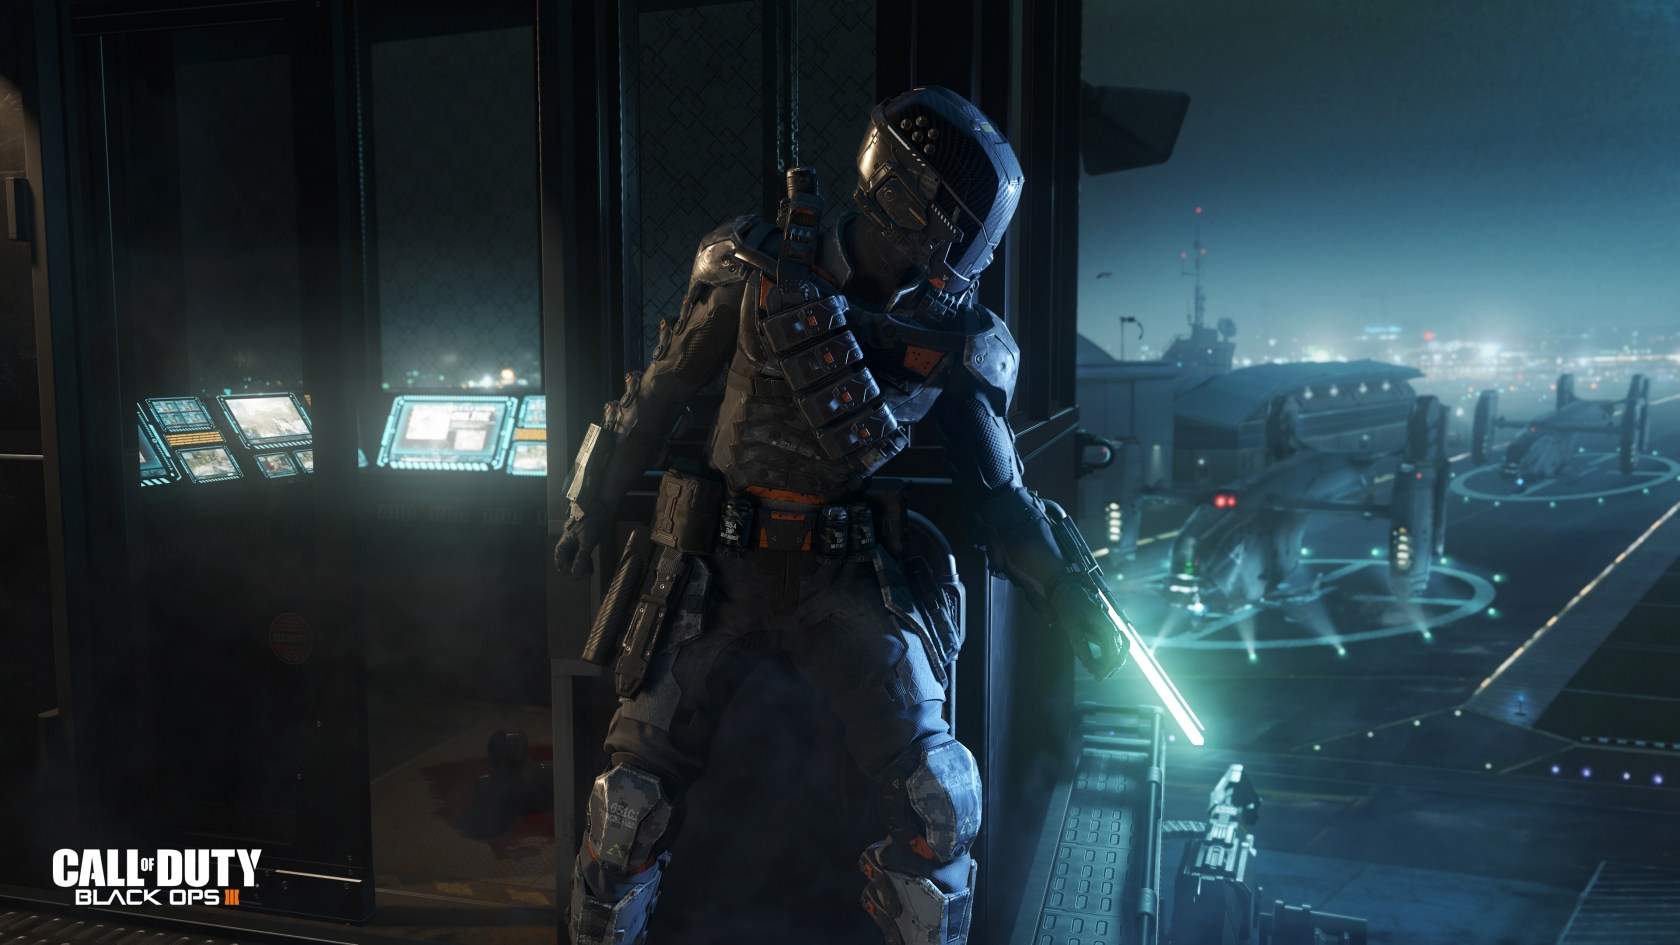 Call of Duty Black Ops 3 Specialist Spectre for 1680 x 945 HDTV resolution